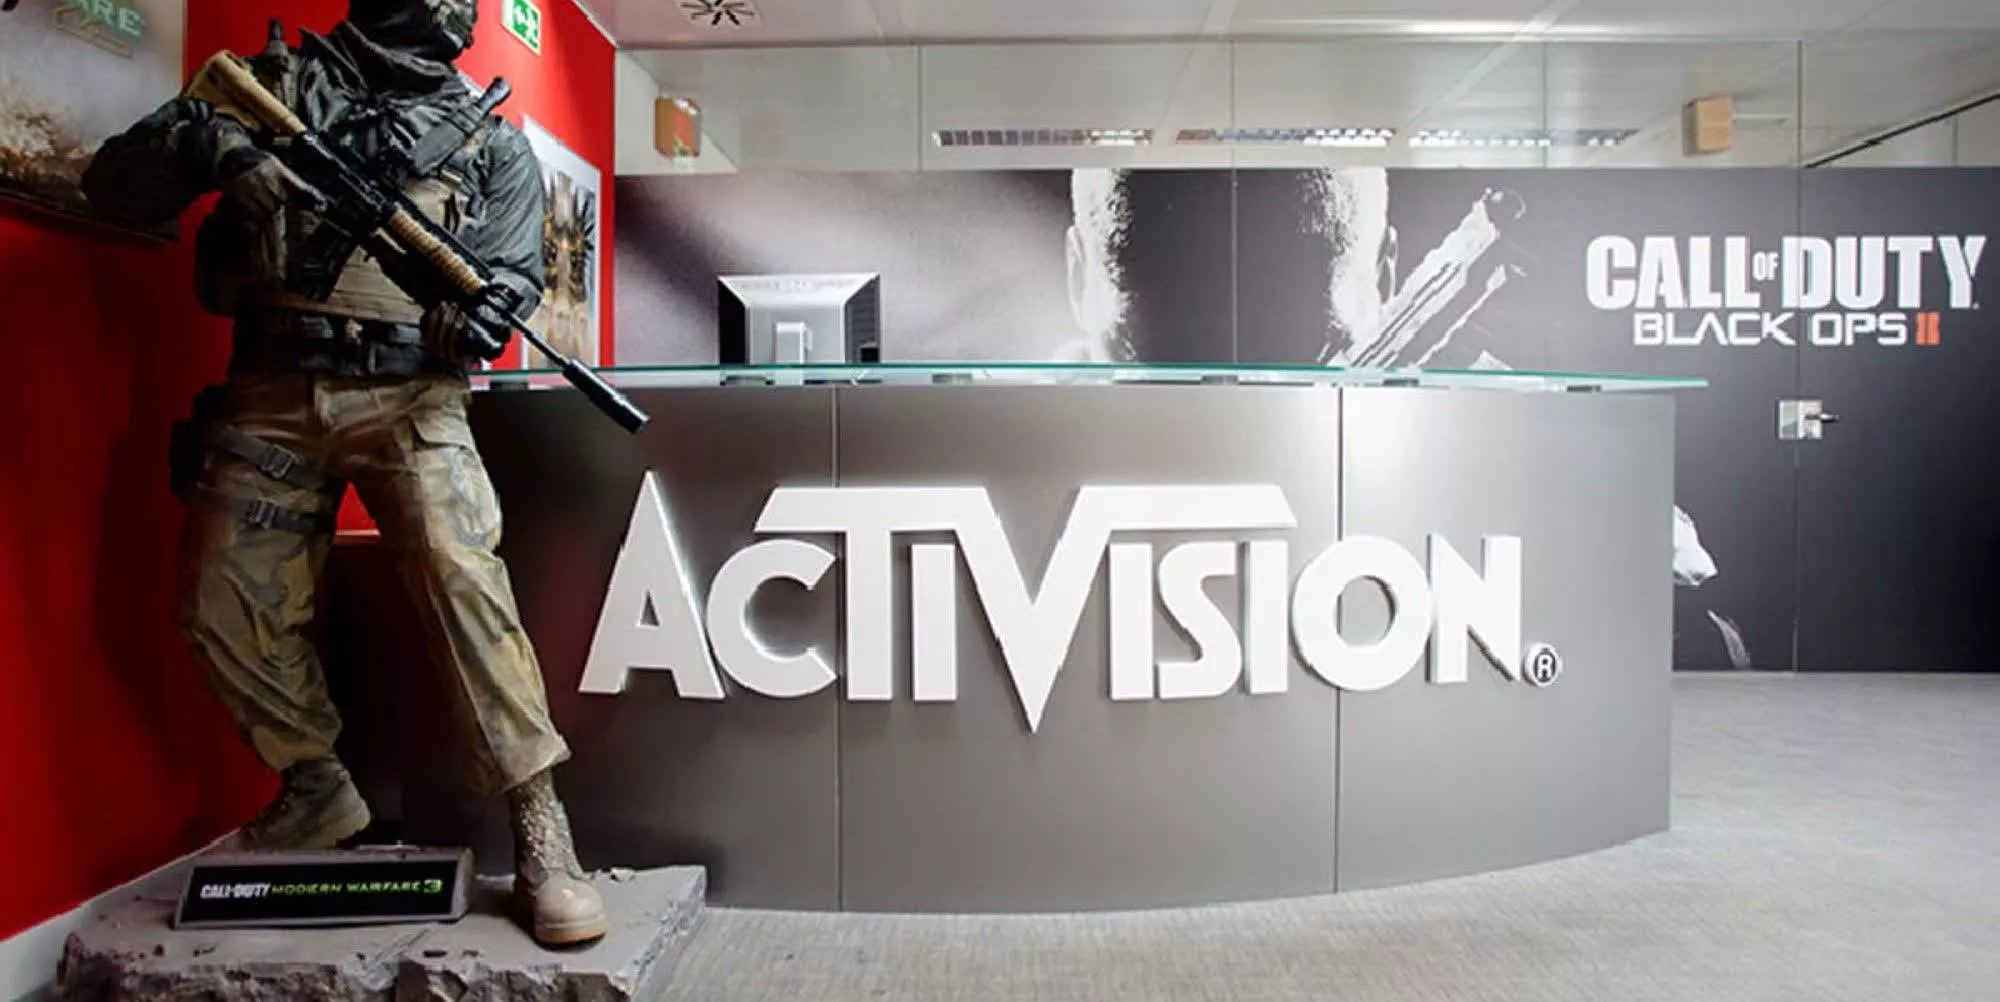 Activision investigates itself and unsurprisingly finds no evidence of systemic harassment